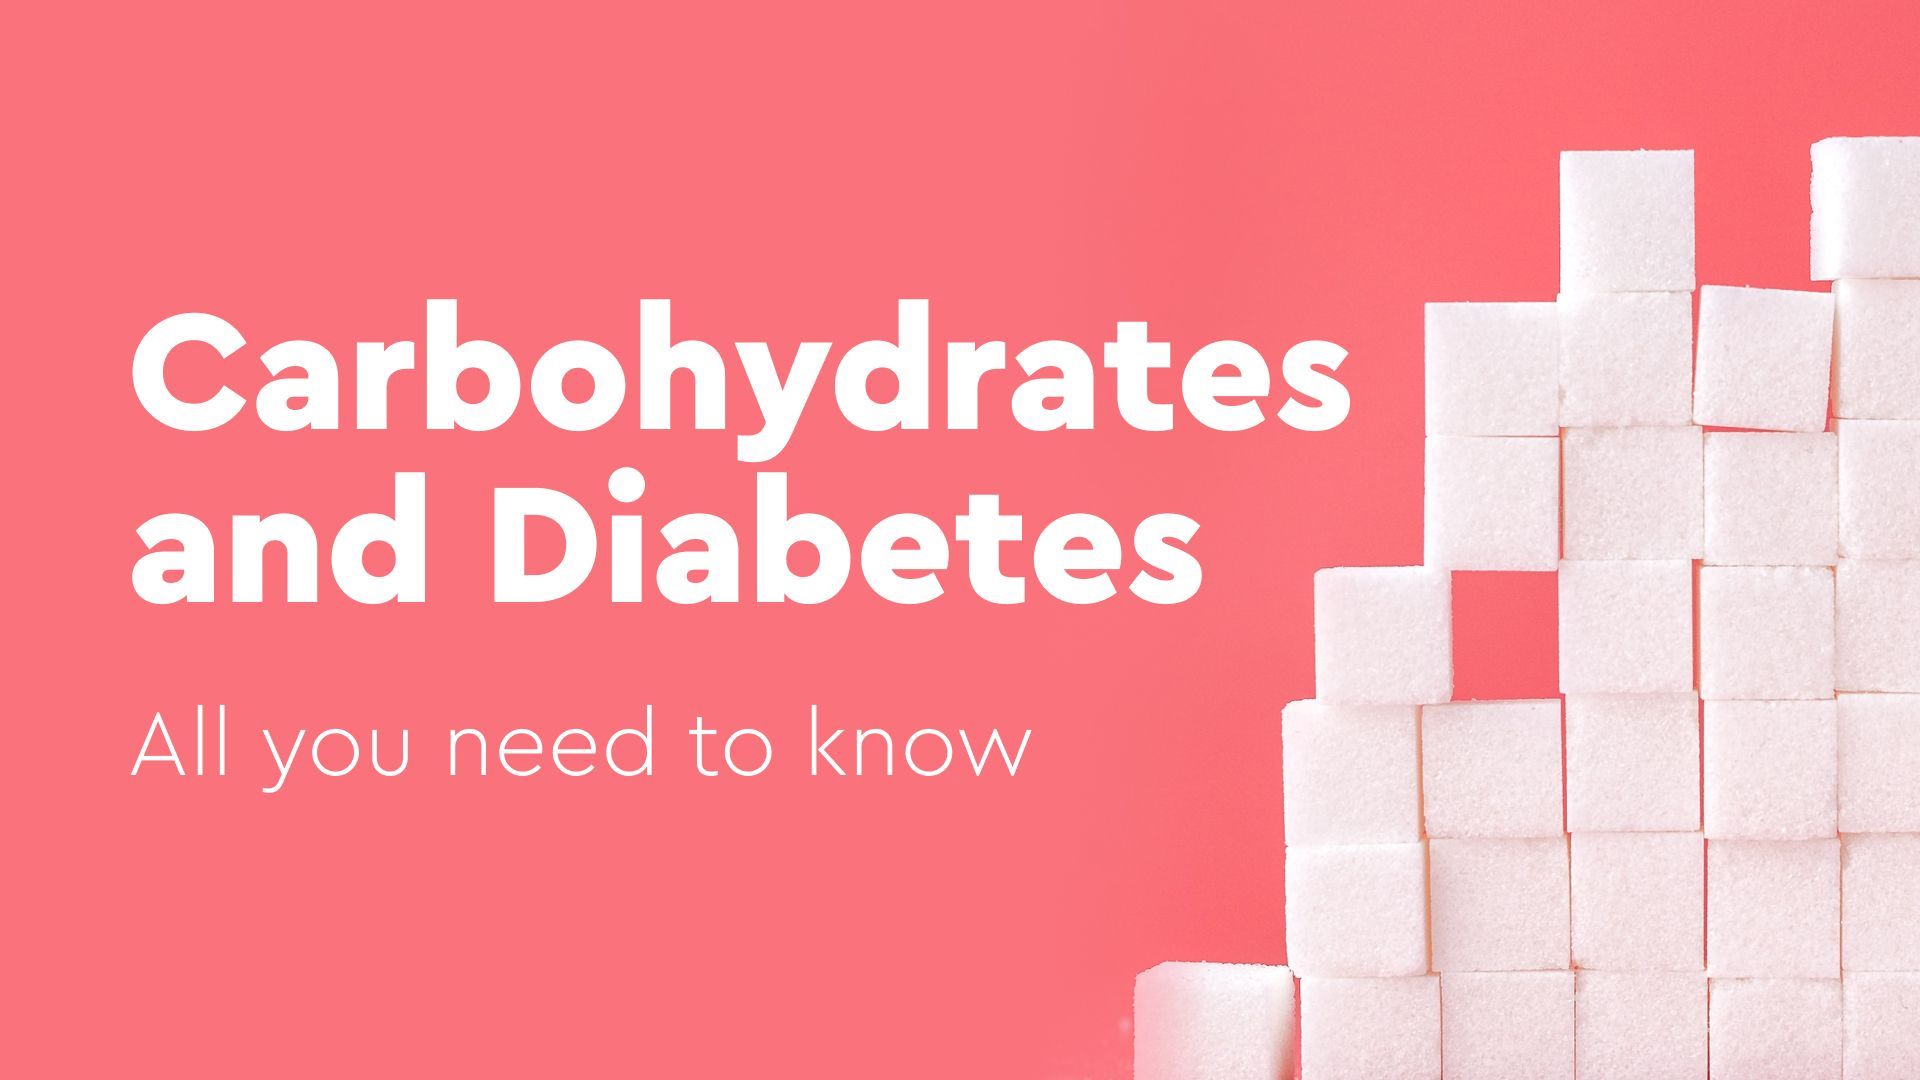 Carbohydrates and Diabetes: All you need to know